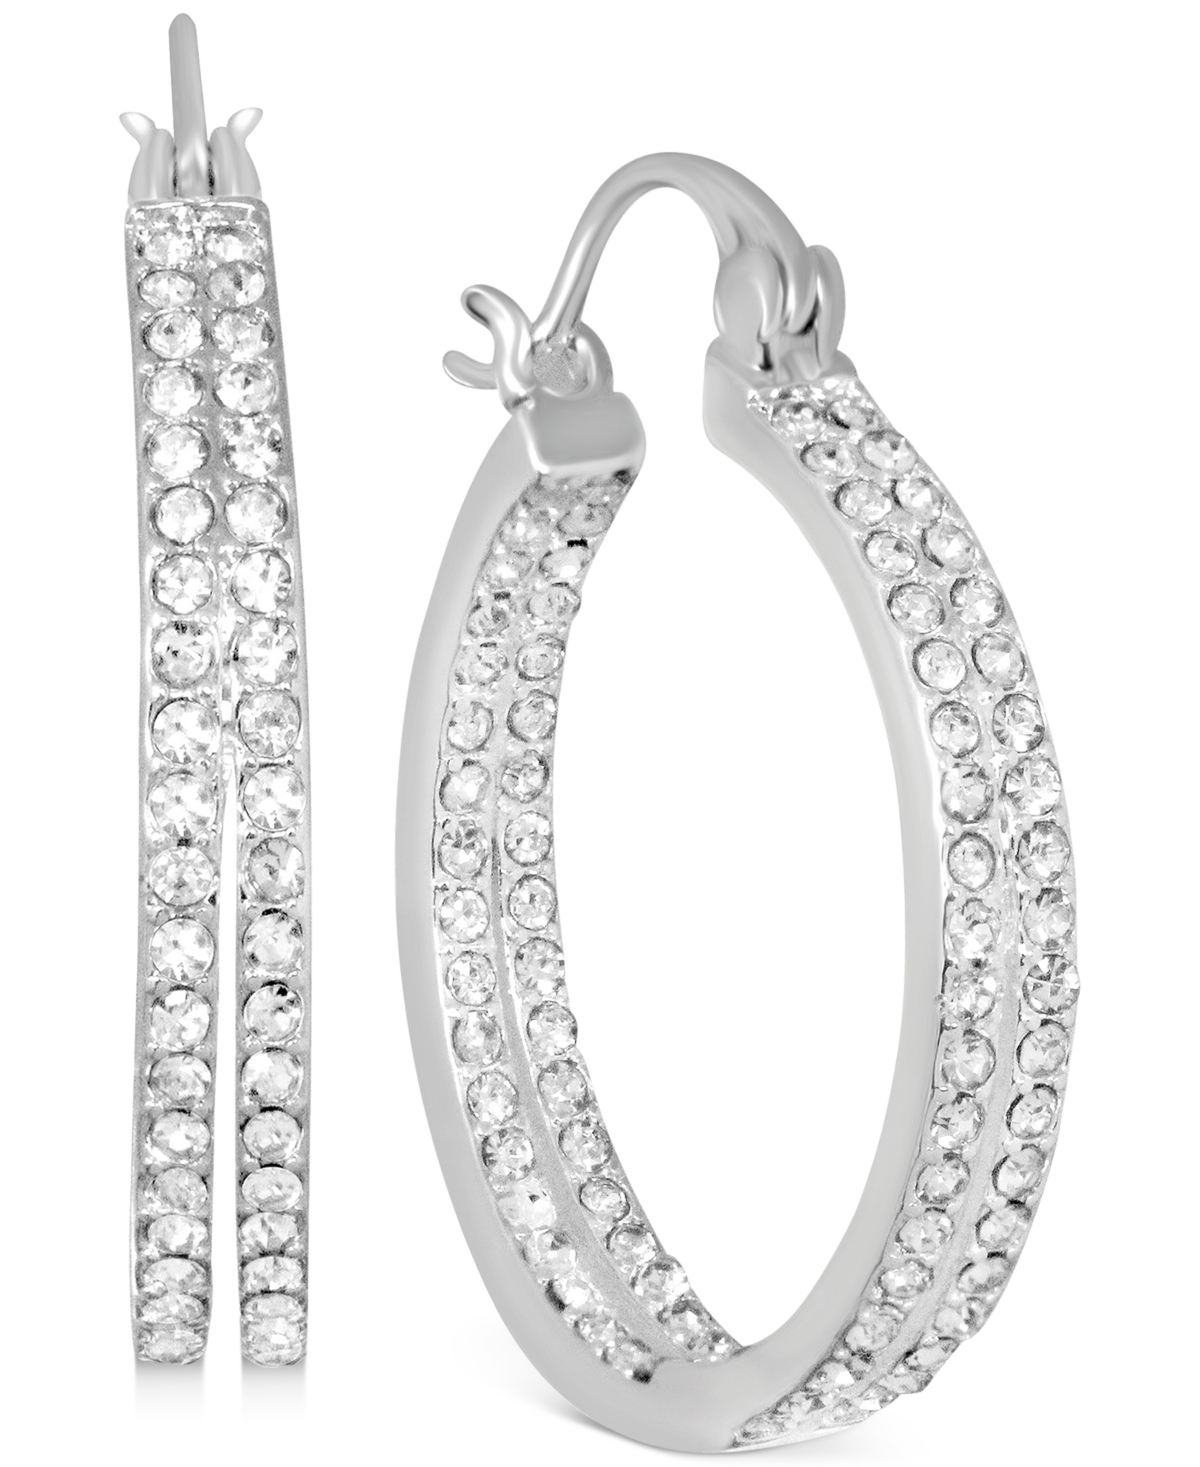 Crystal Small Double Hoop Earrings in Silver-Plate or Gold Plate, 1" - Gold